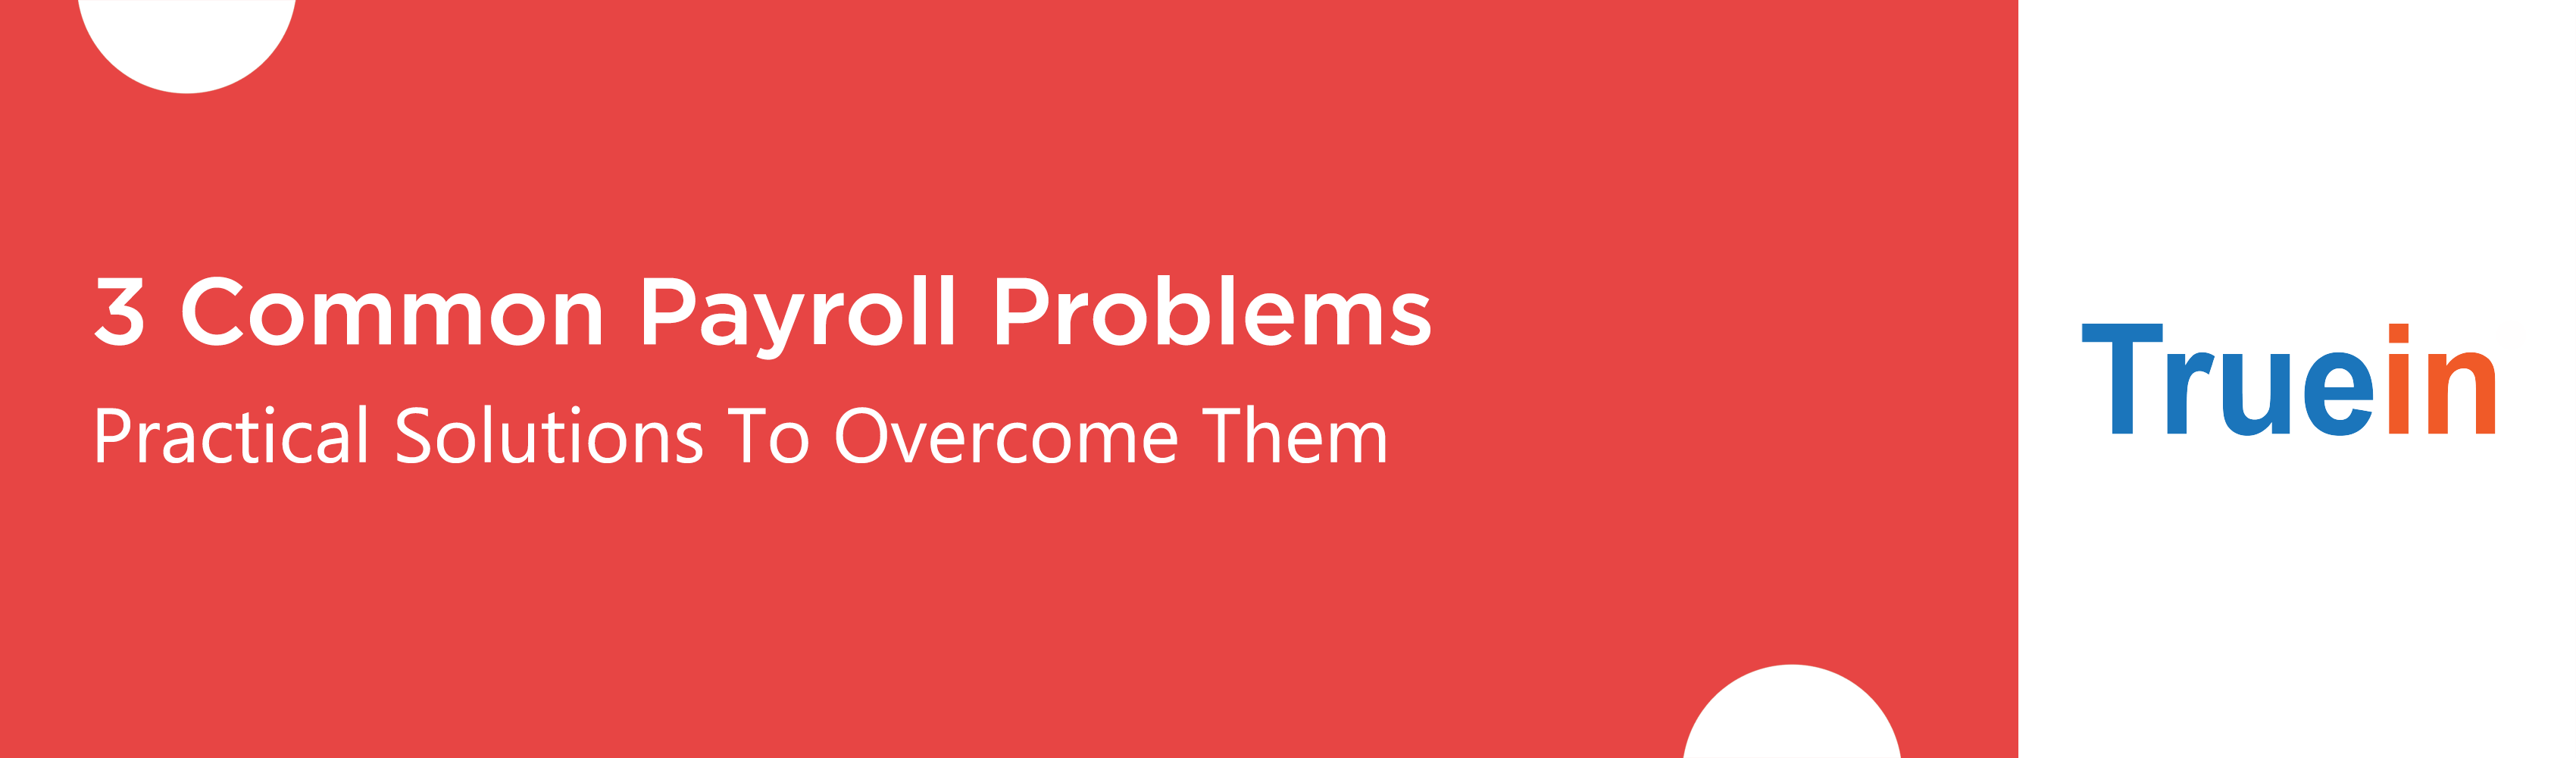 3 Common Payroll Problems and Practical Solutions To Overcome Them